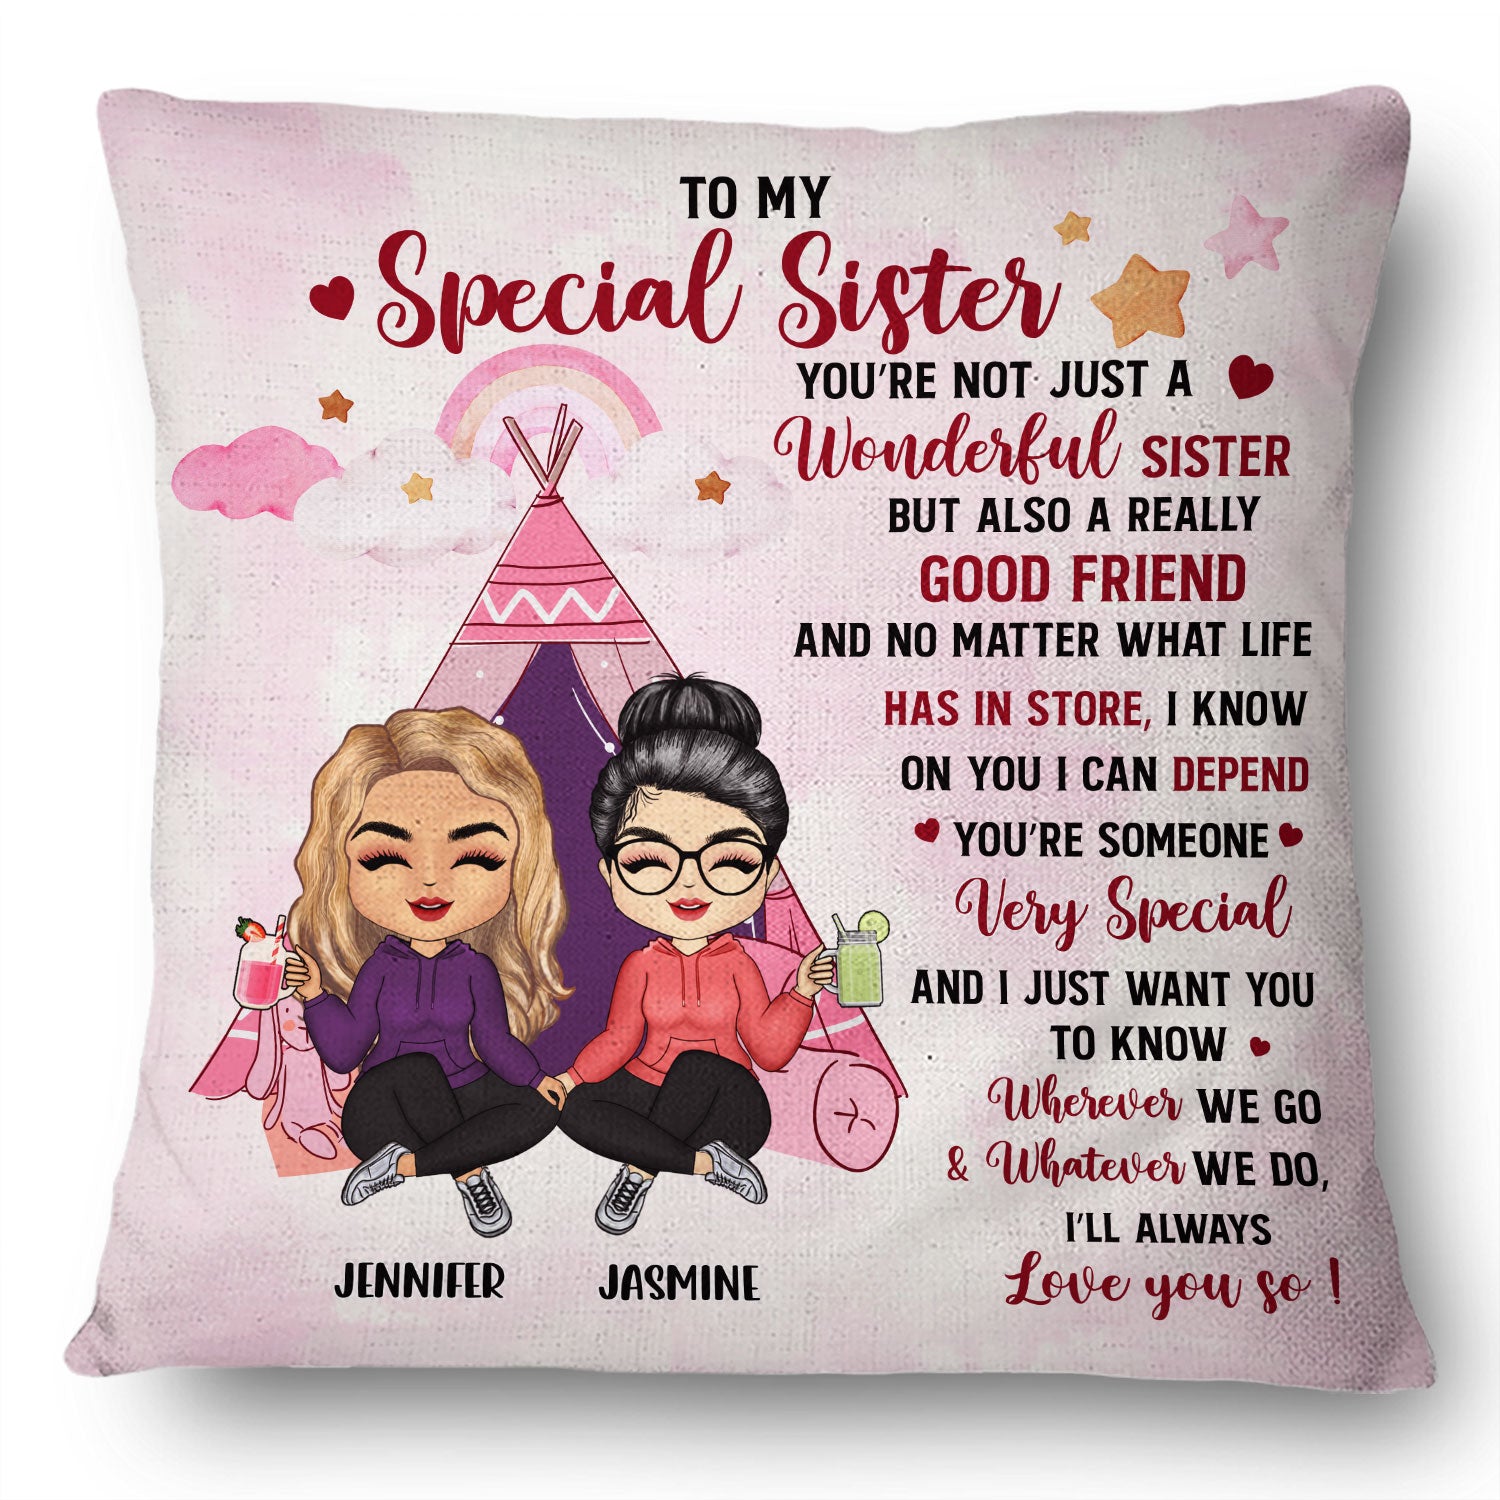 Not Just A Wonderful Sister But Also A Good Friend - Gift For Sisters & Siblings - Personalized Custom Pillow